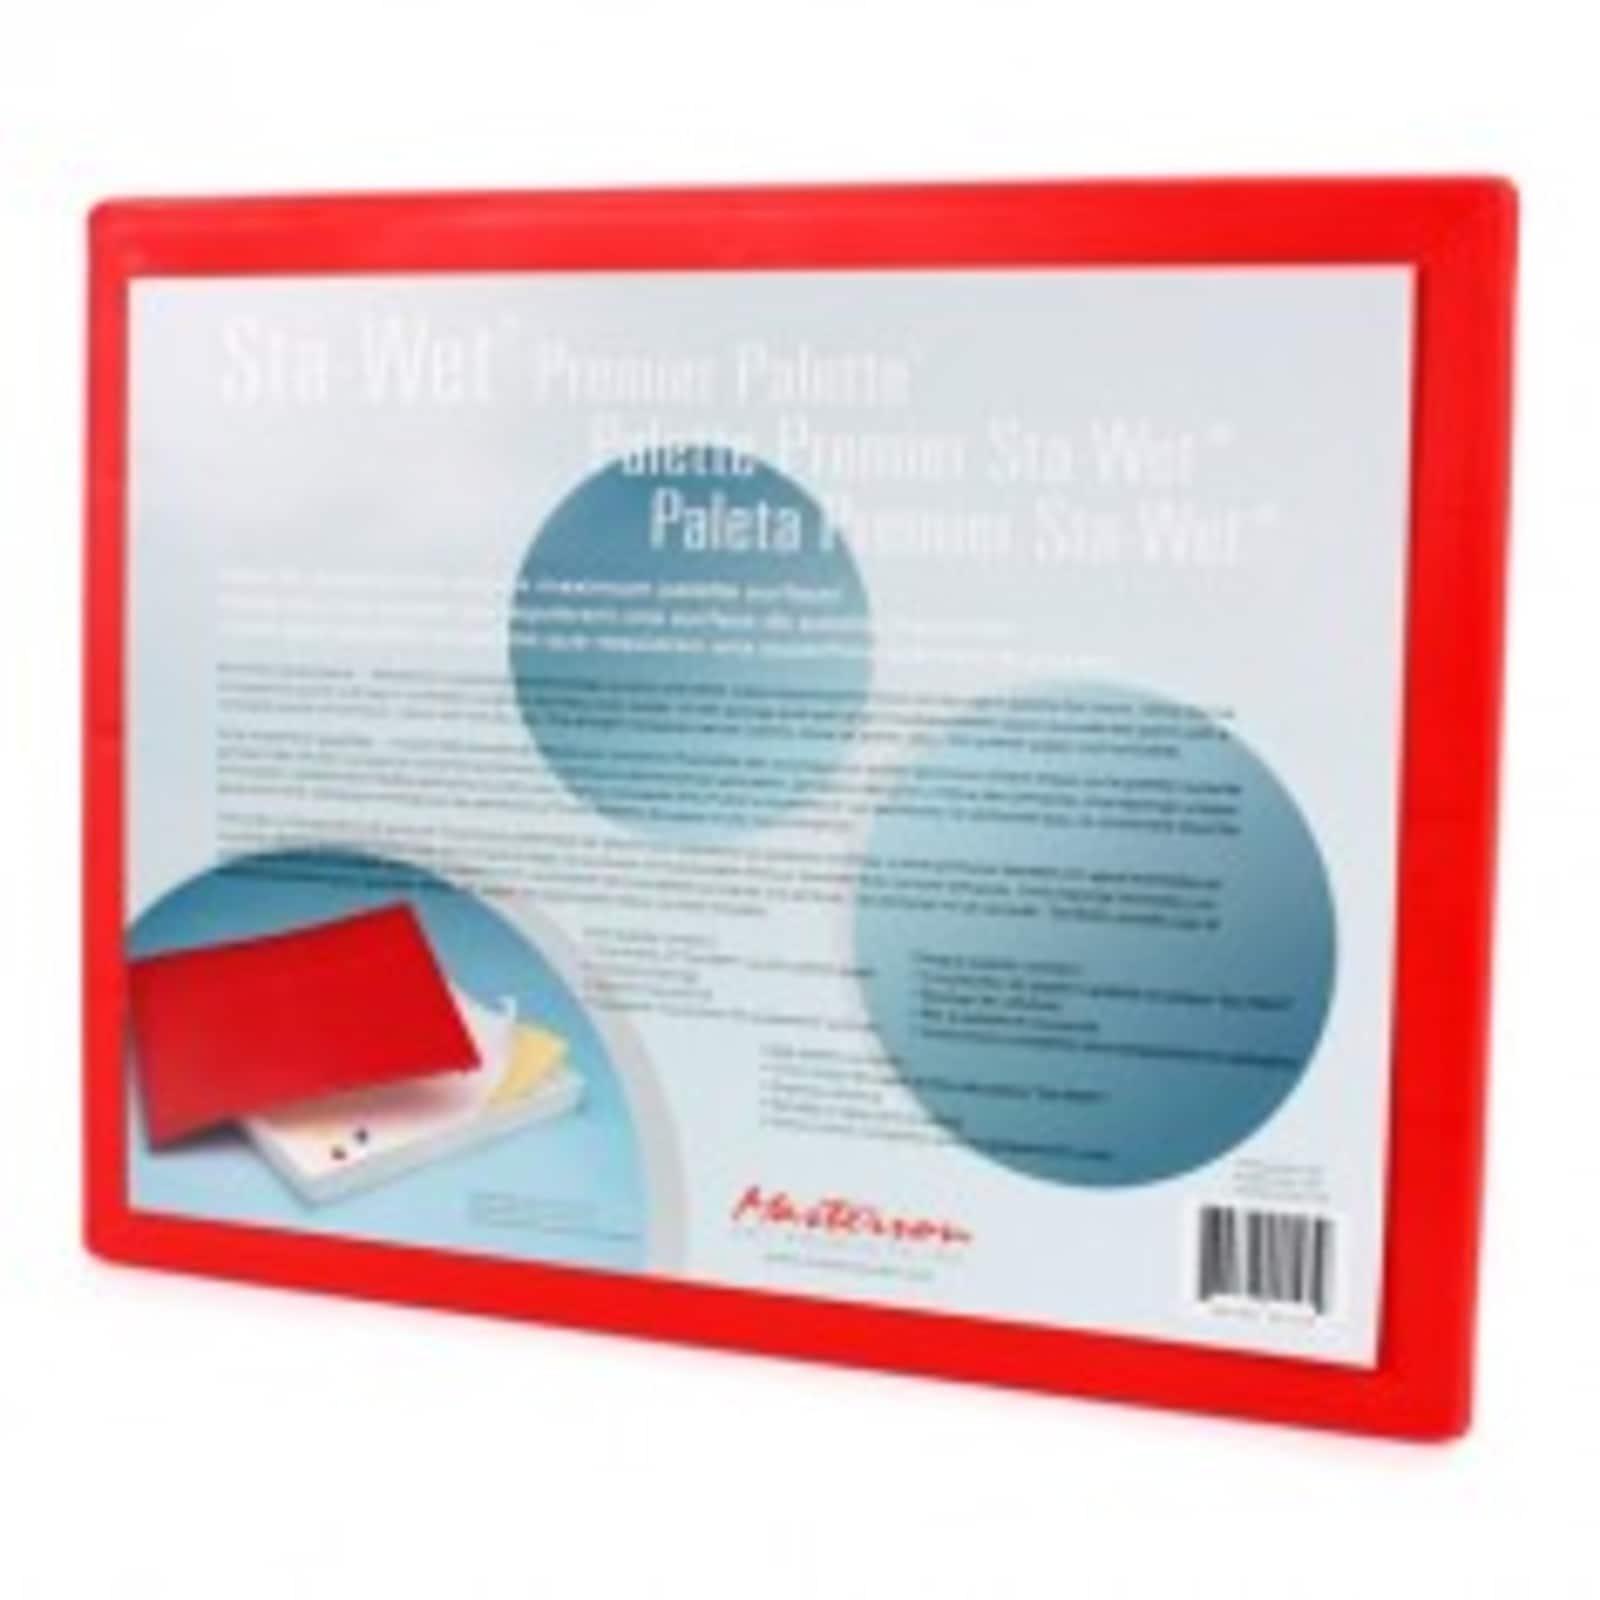 Masterson Sta-Wet® Covered Acrylic Palette